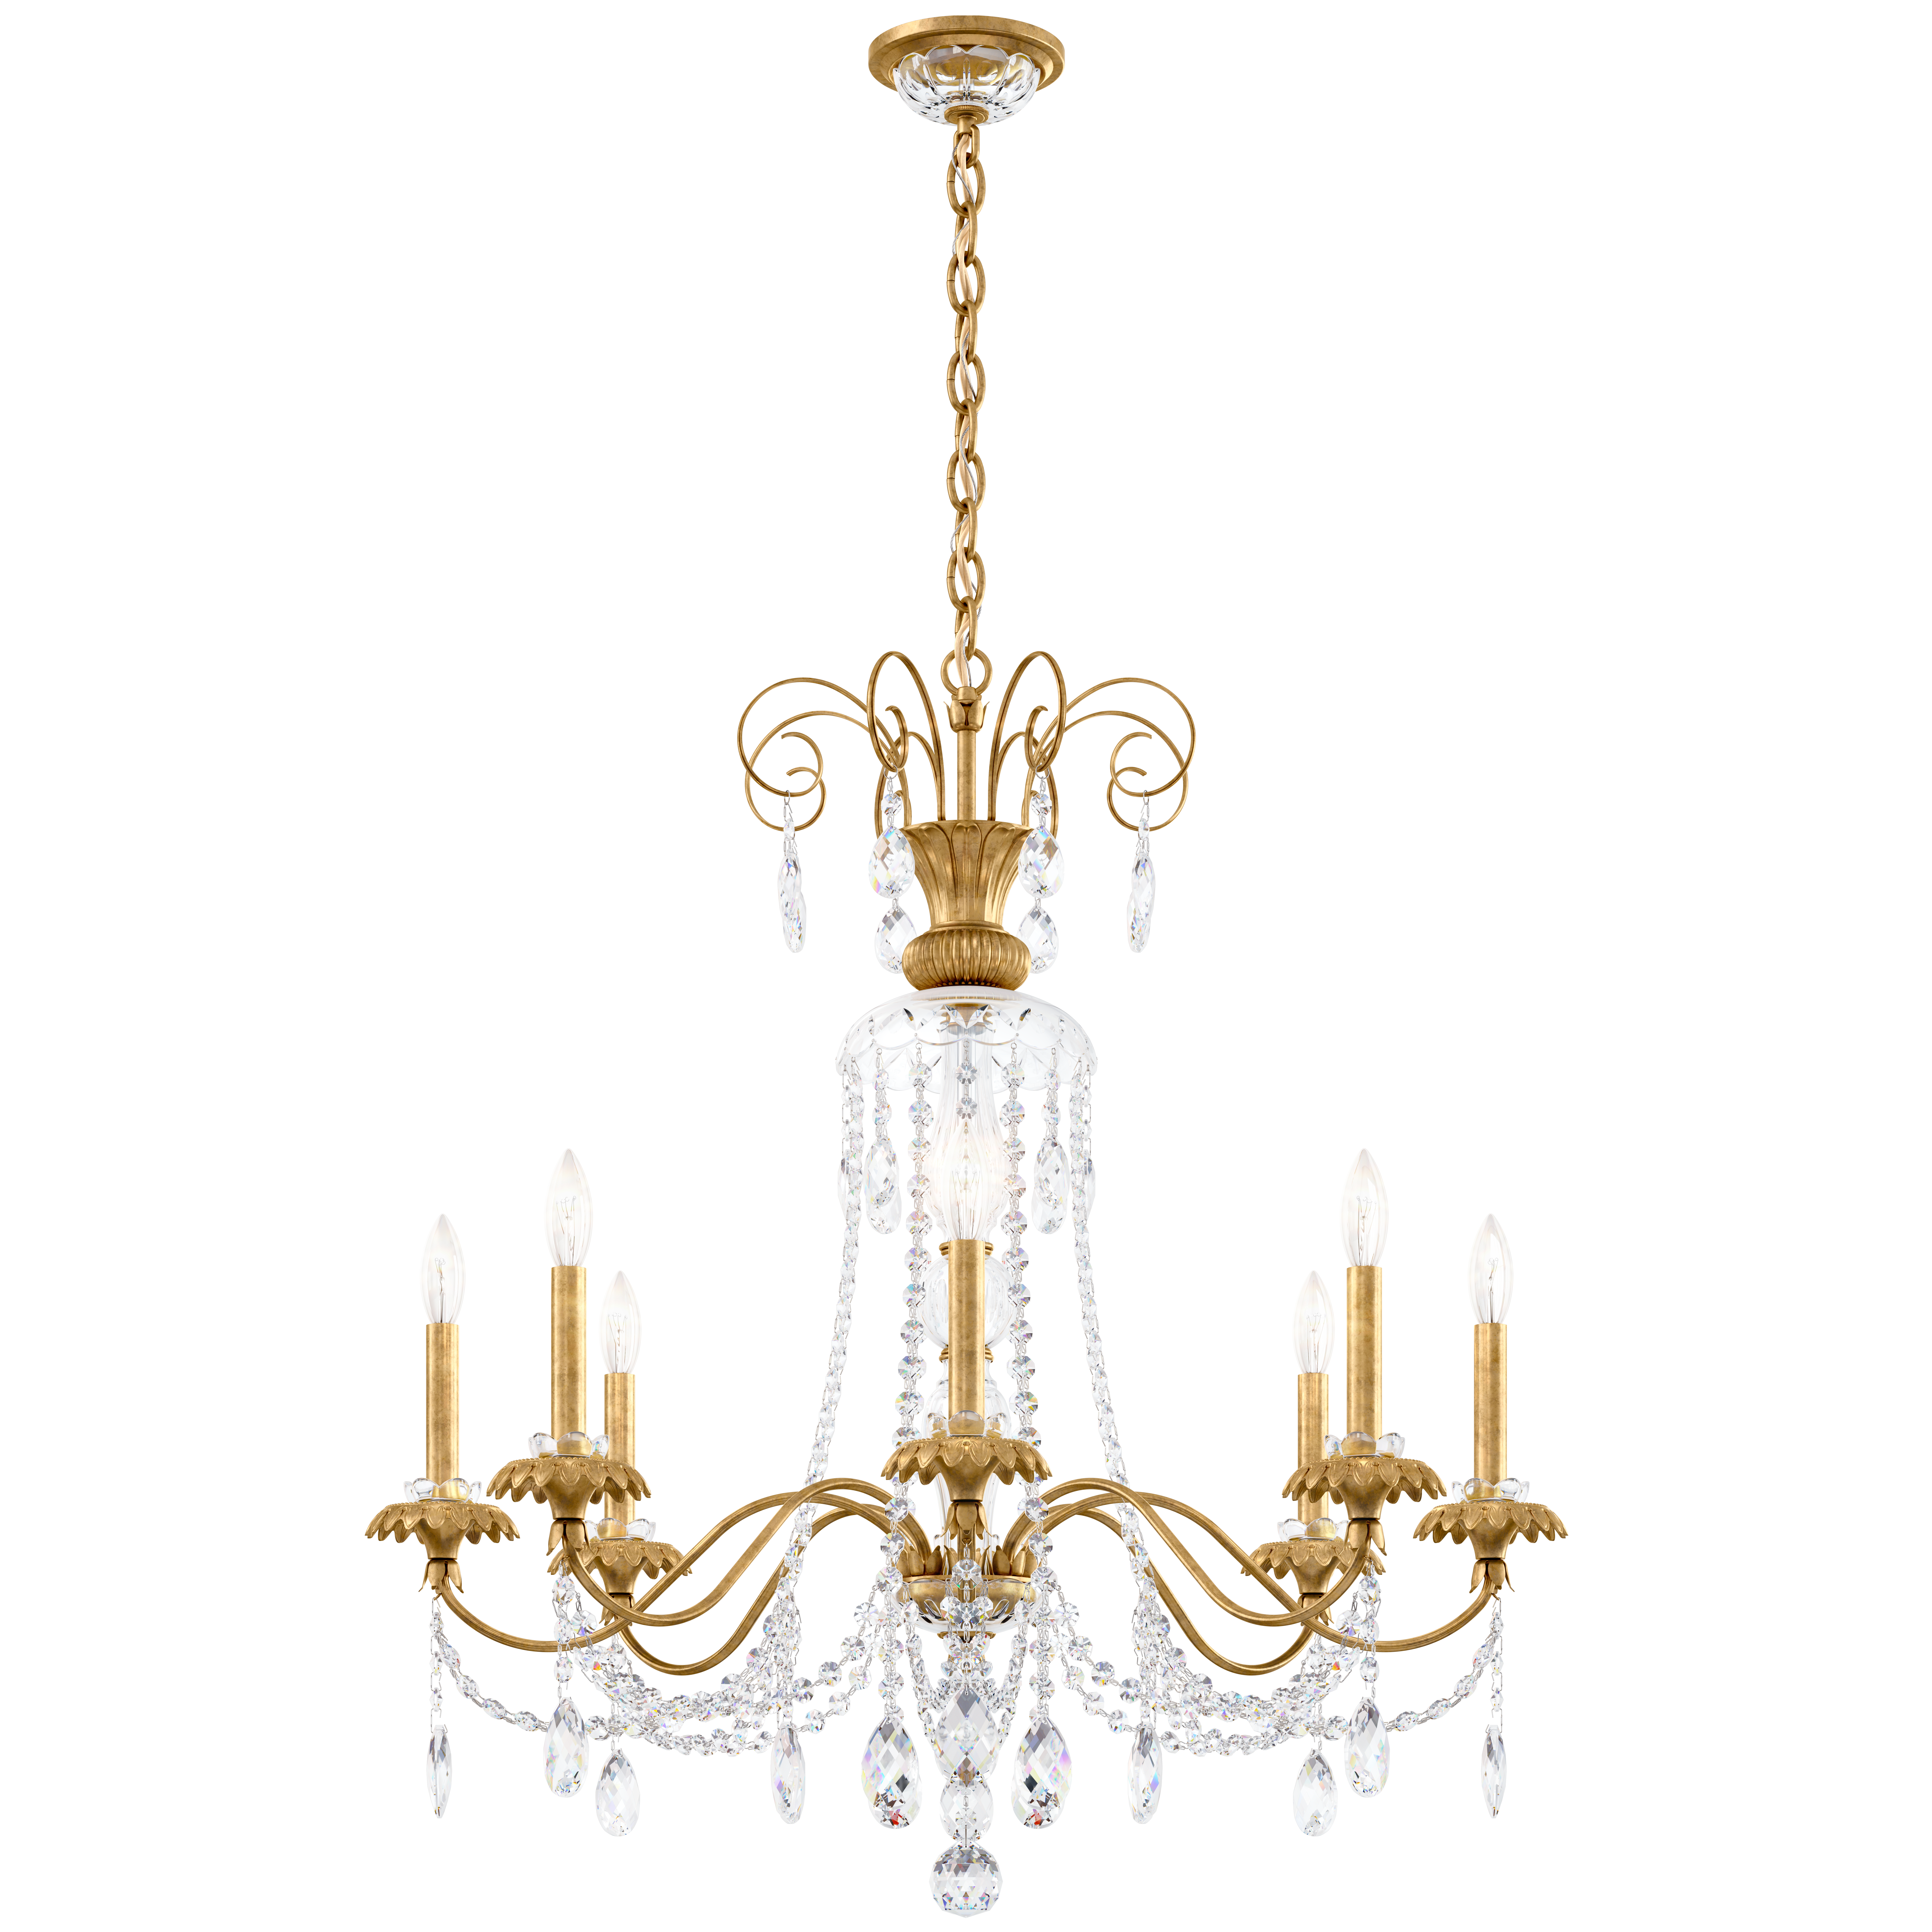 Schonbek AT1008N-22H Helenia 8 Light Traditional Chandelier in Heirloom Gold with Clear Heritage Crystal